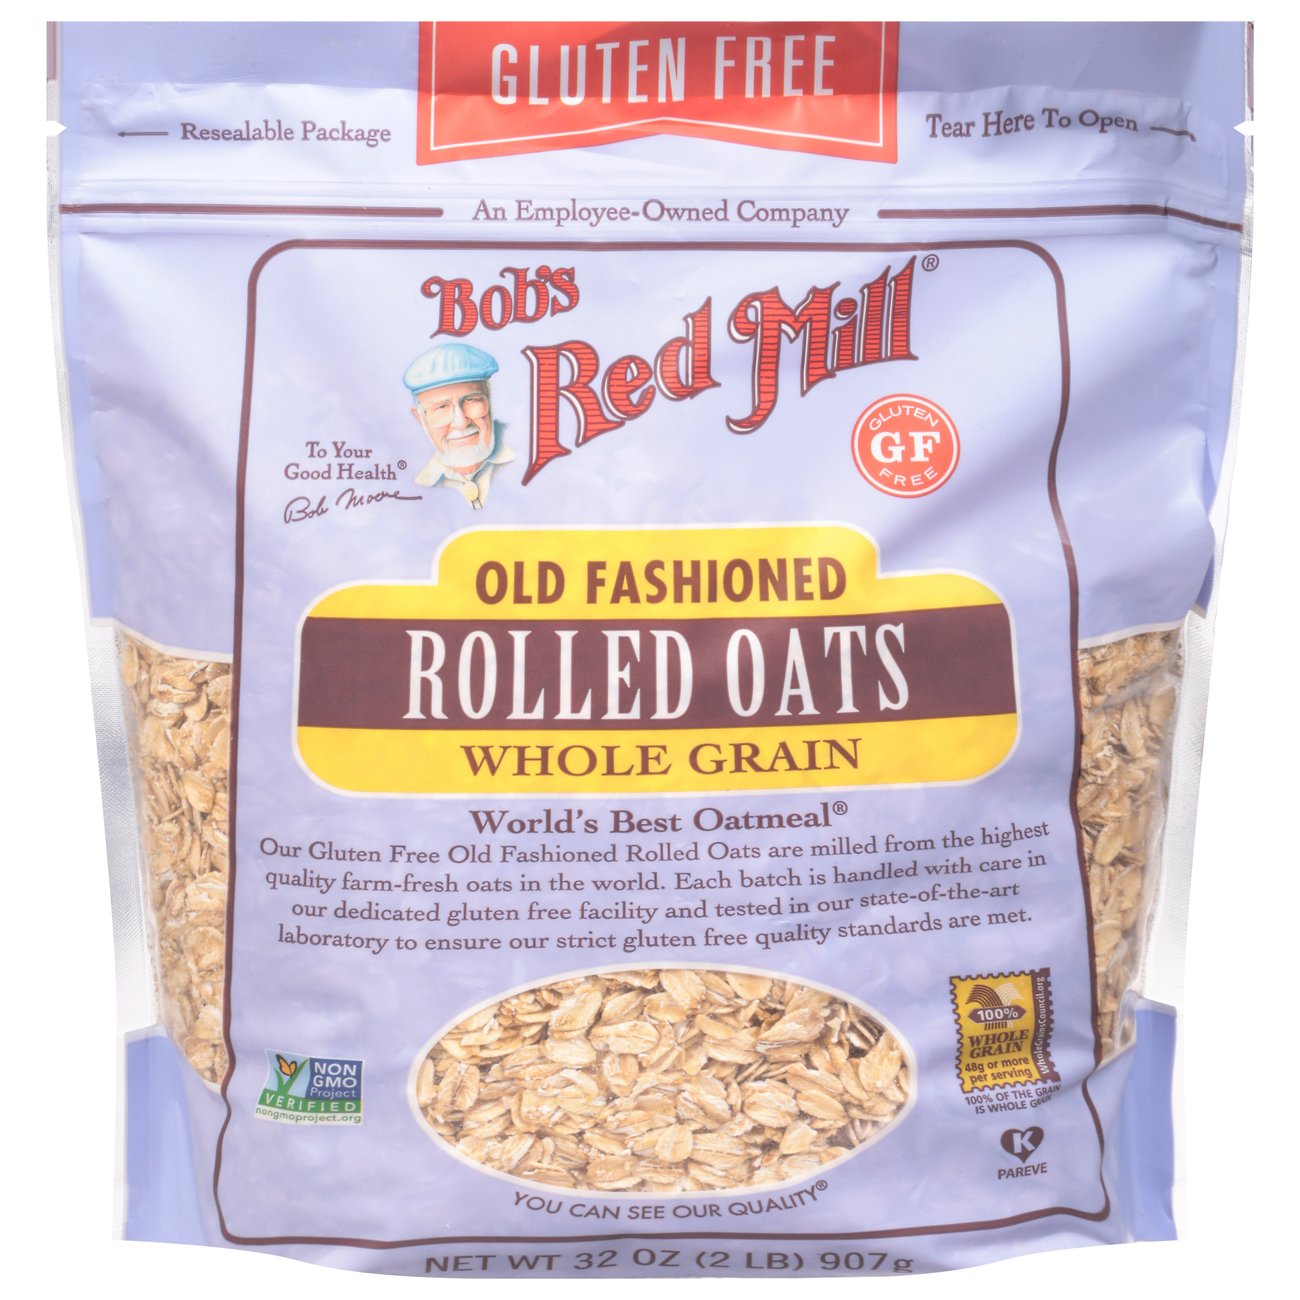 Gluten Free Old Fashioned Rolled Oats